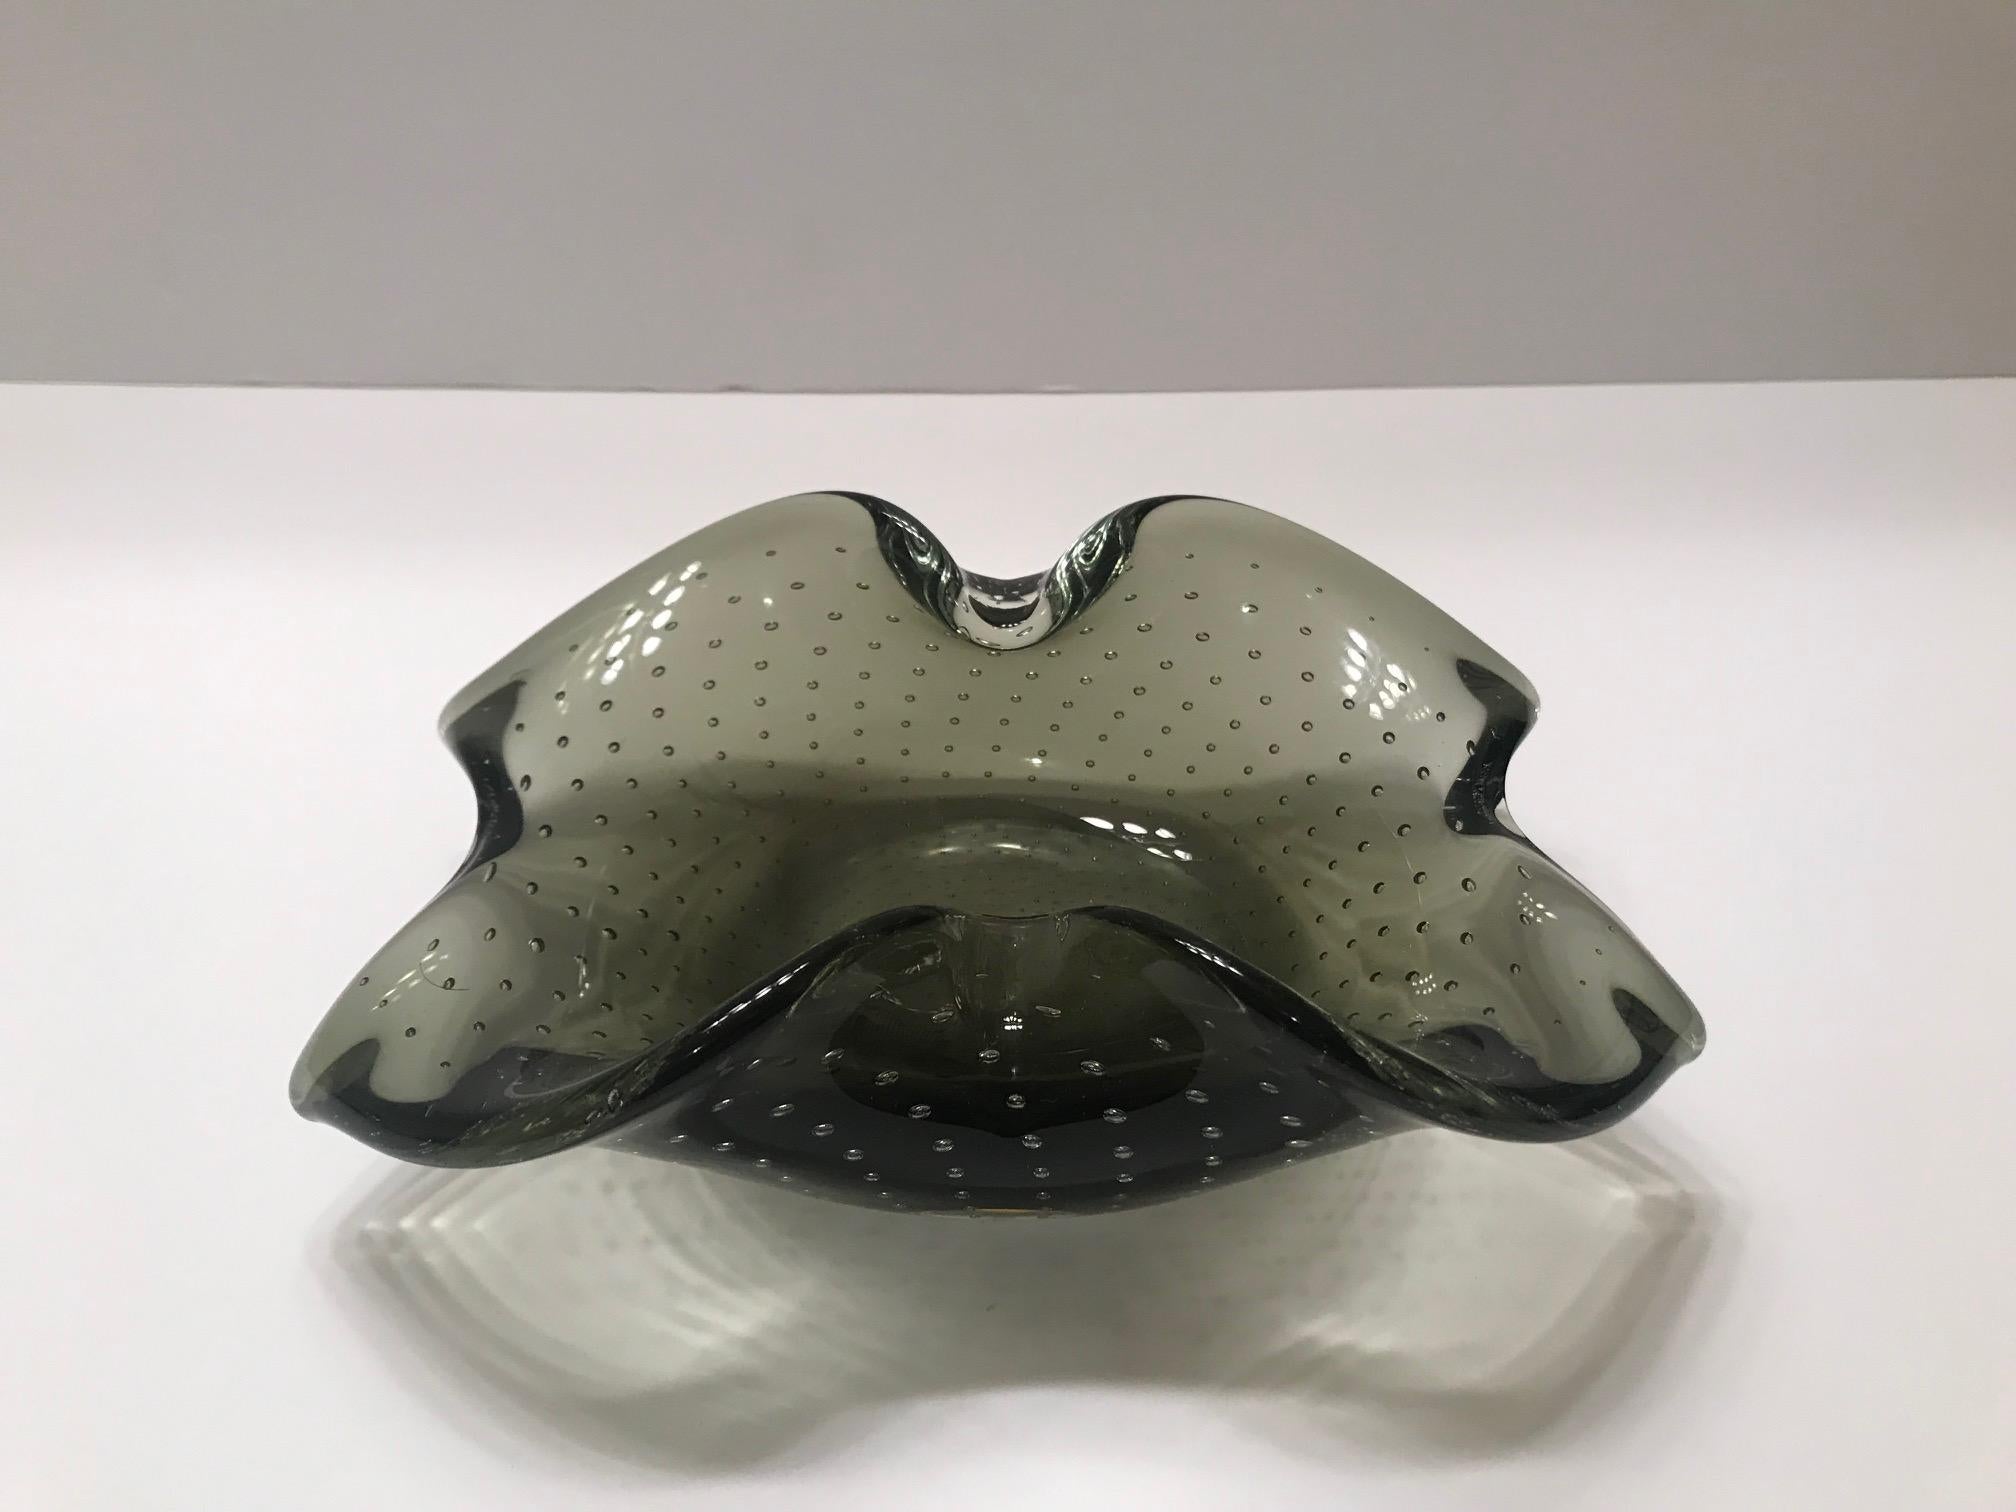 Mid-Century Modern Italian 1950s Murano Glass Bowl with Organic Form and Controlled Bubbles